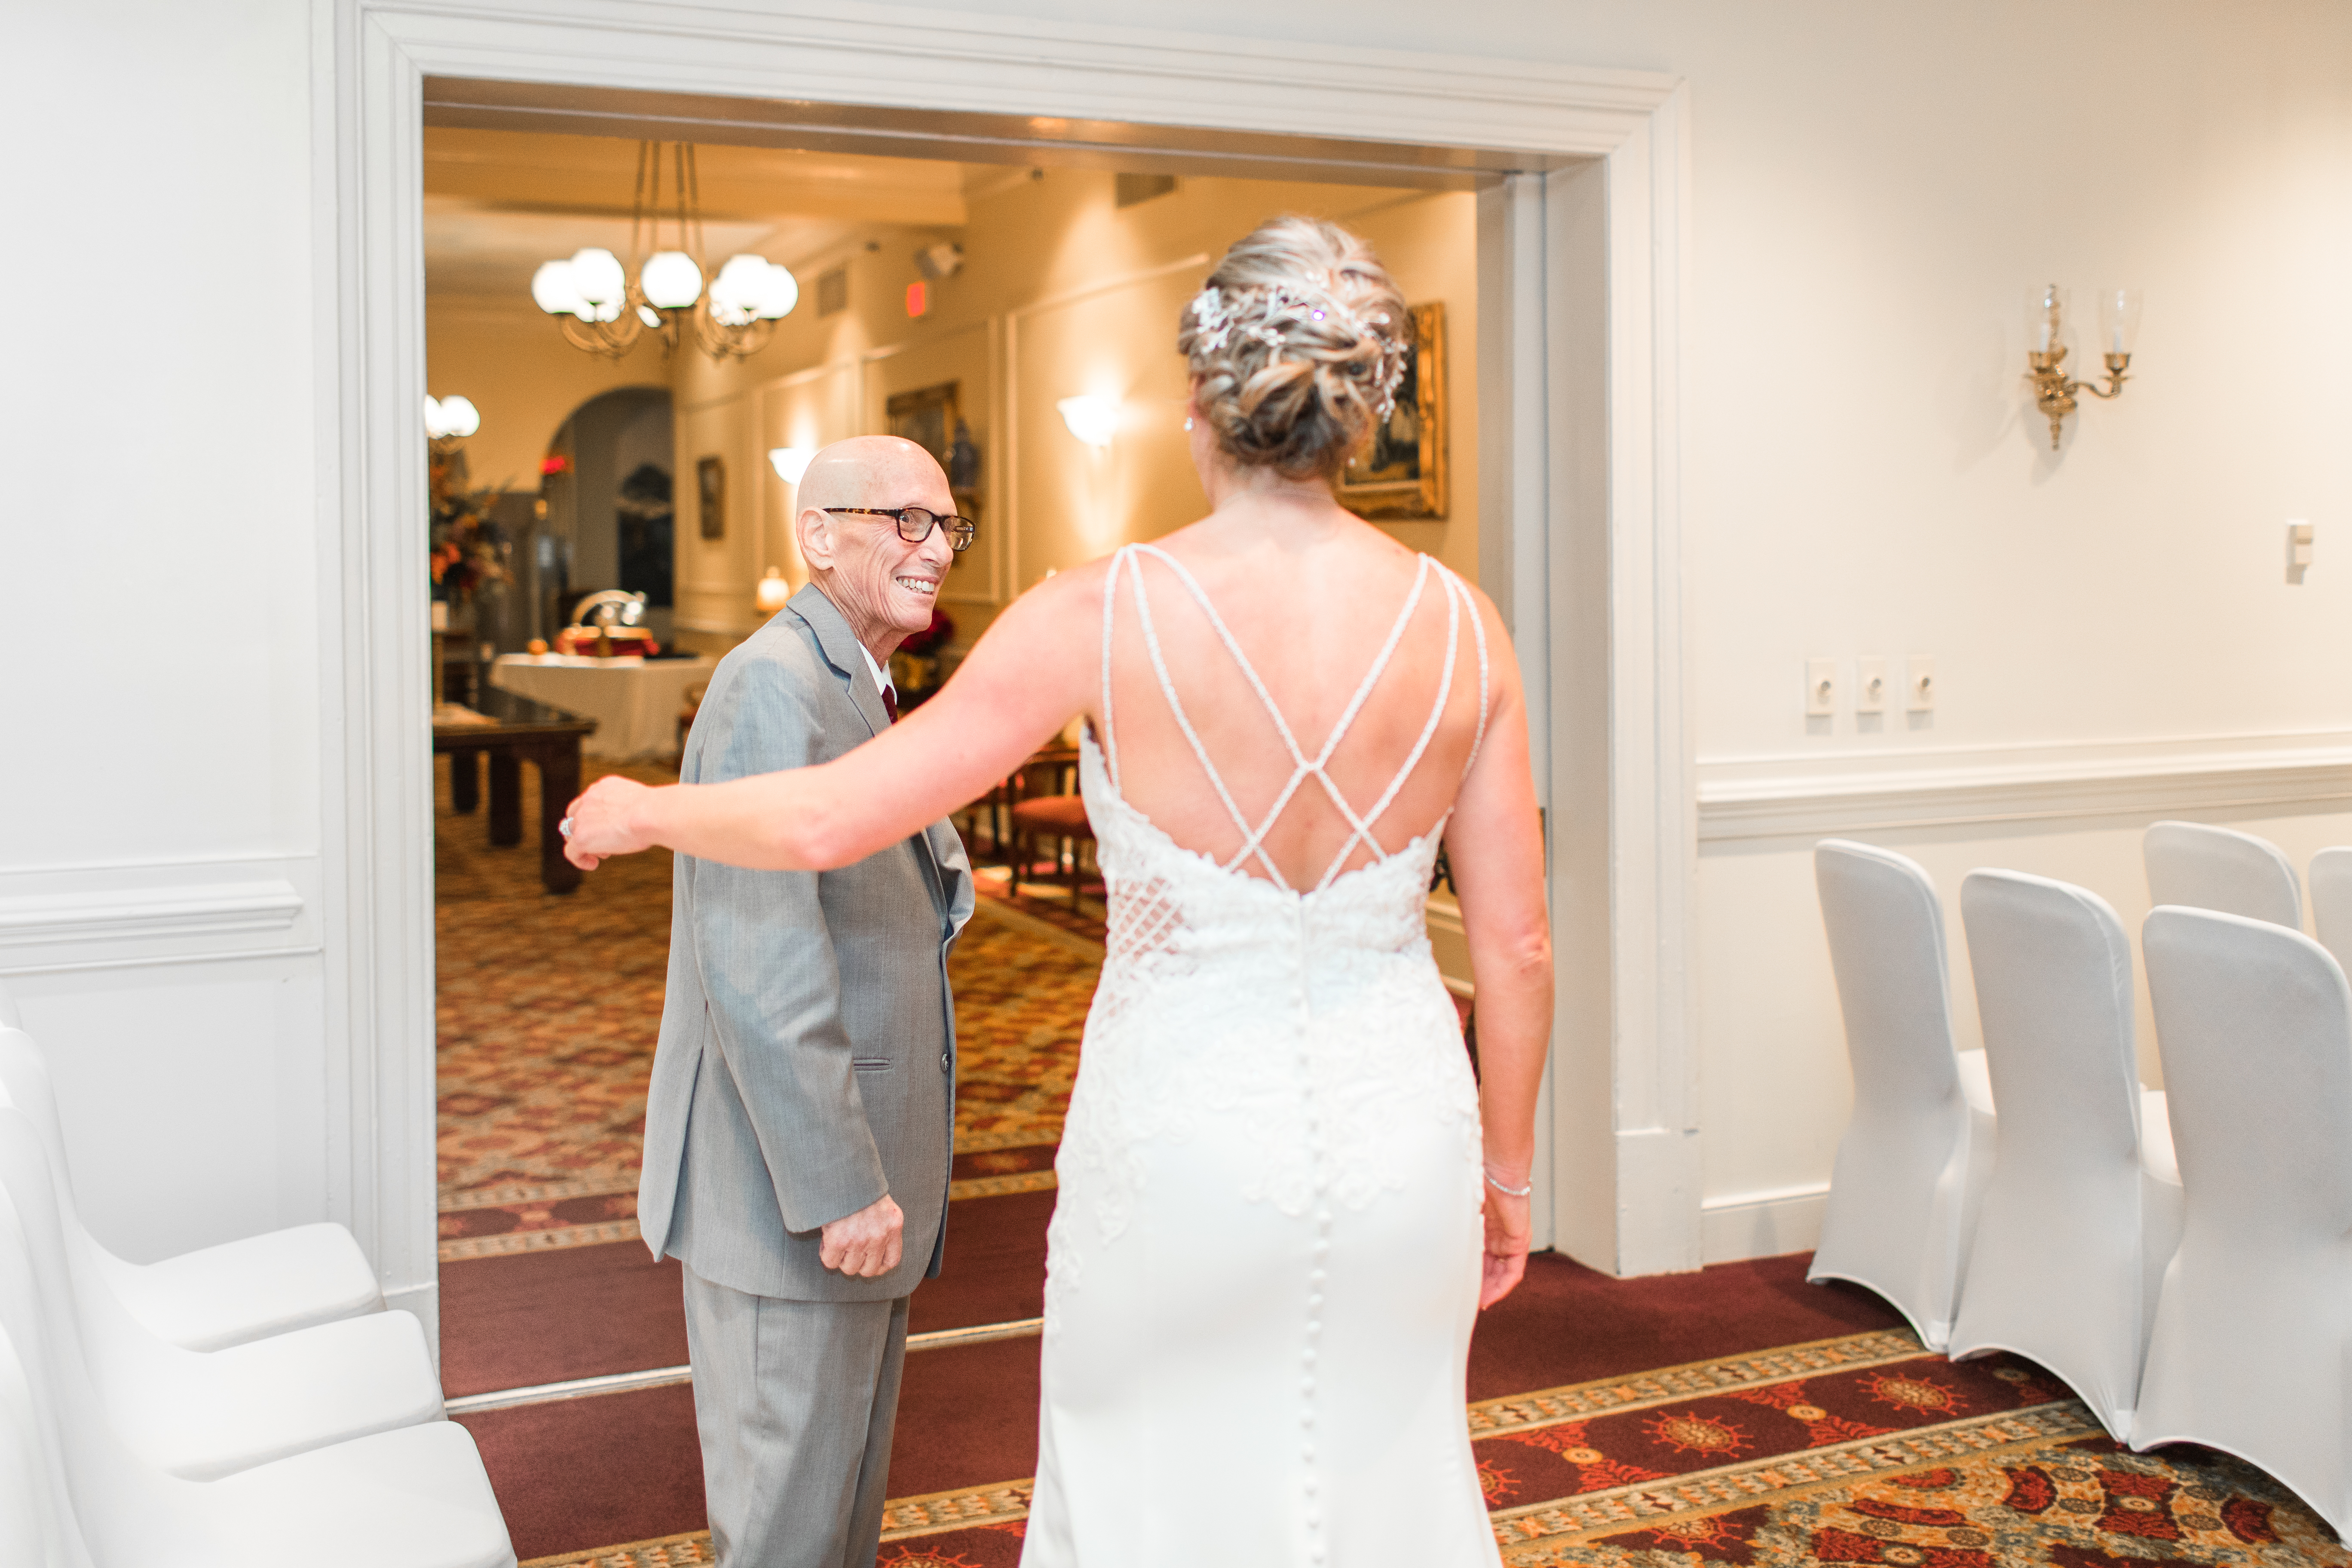 Wedding in Richmond Virginia at the Renaissance by the tuckers photography